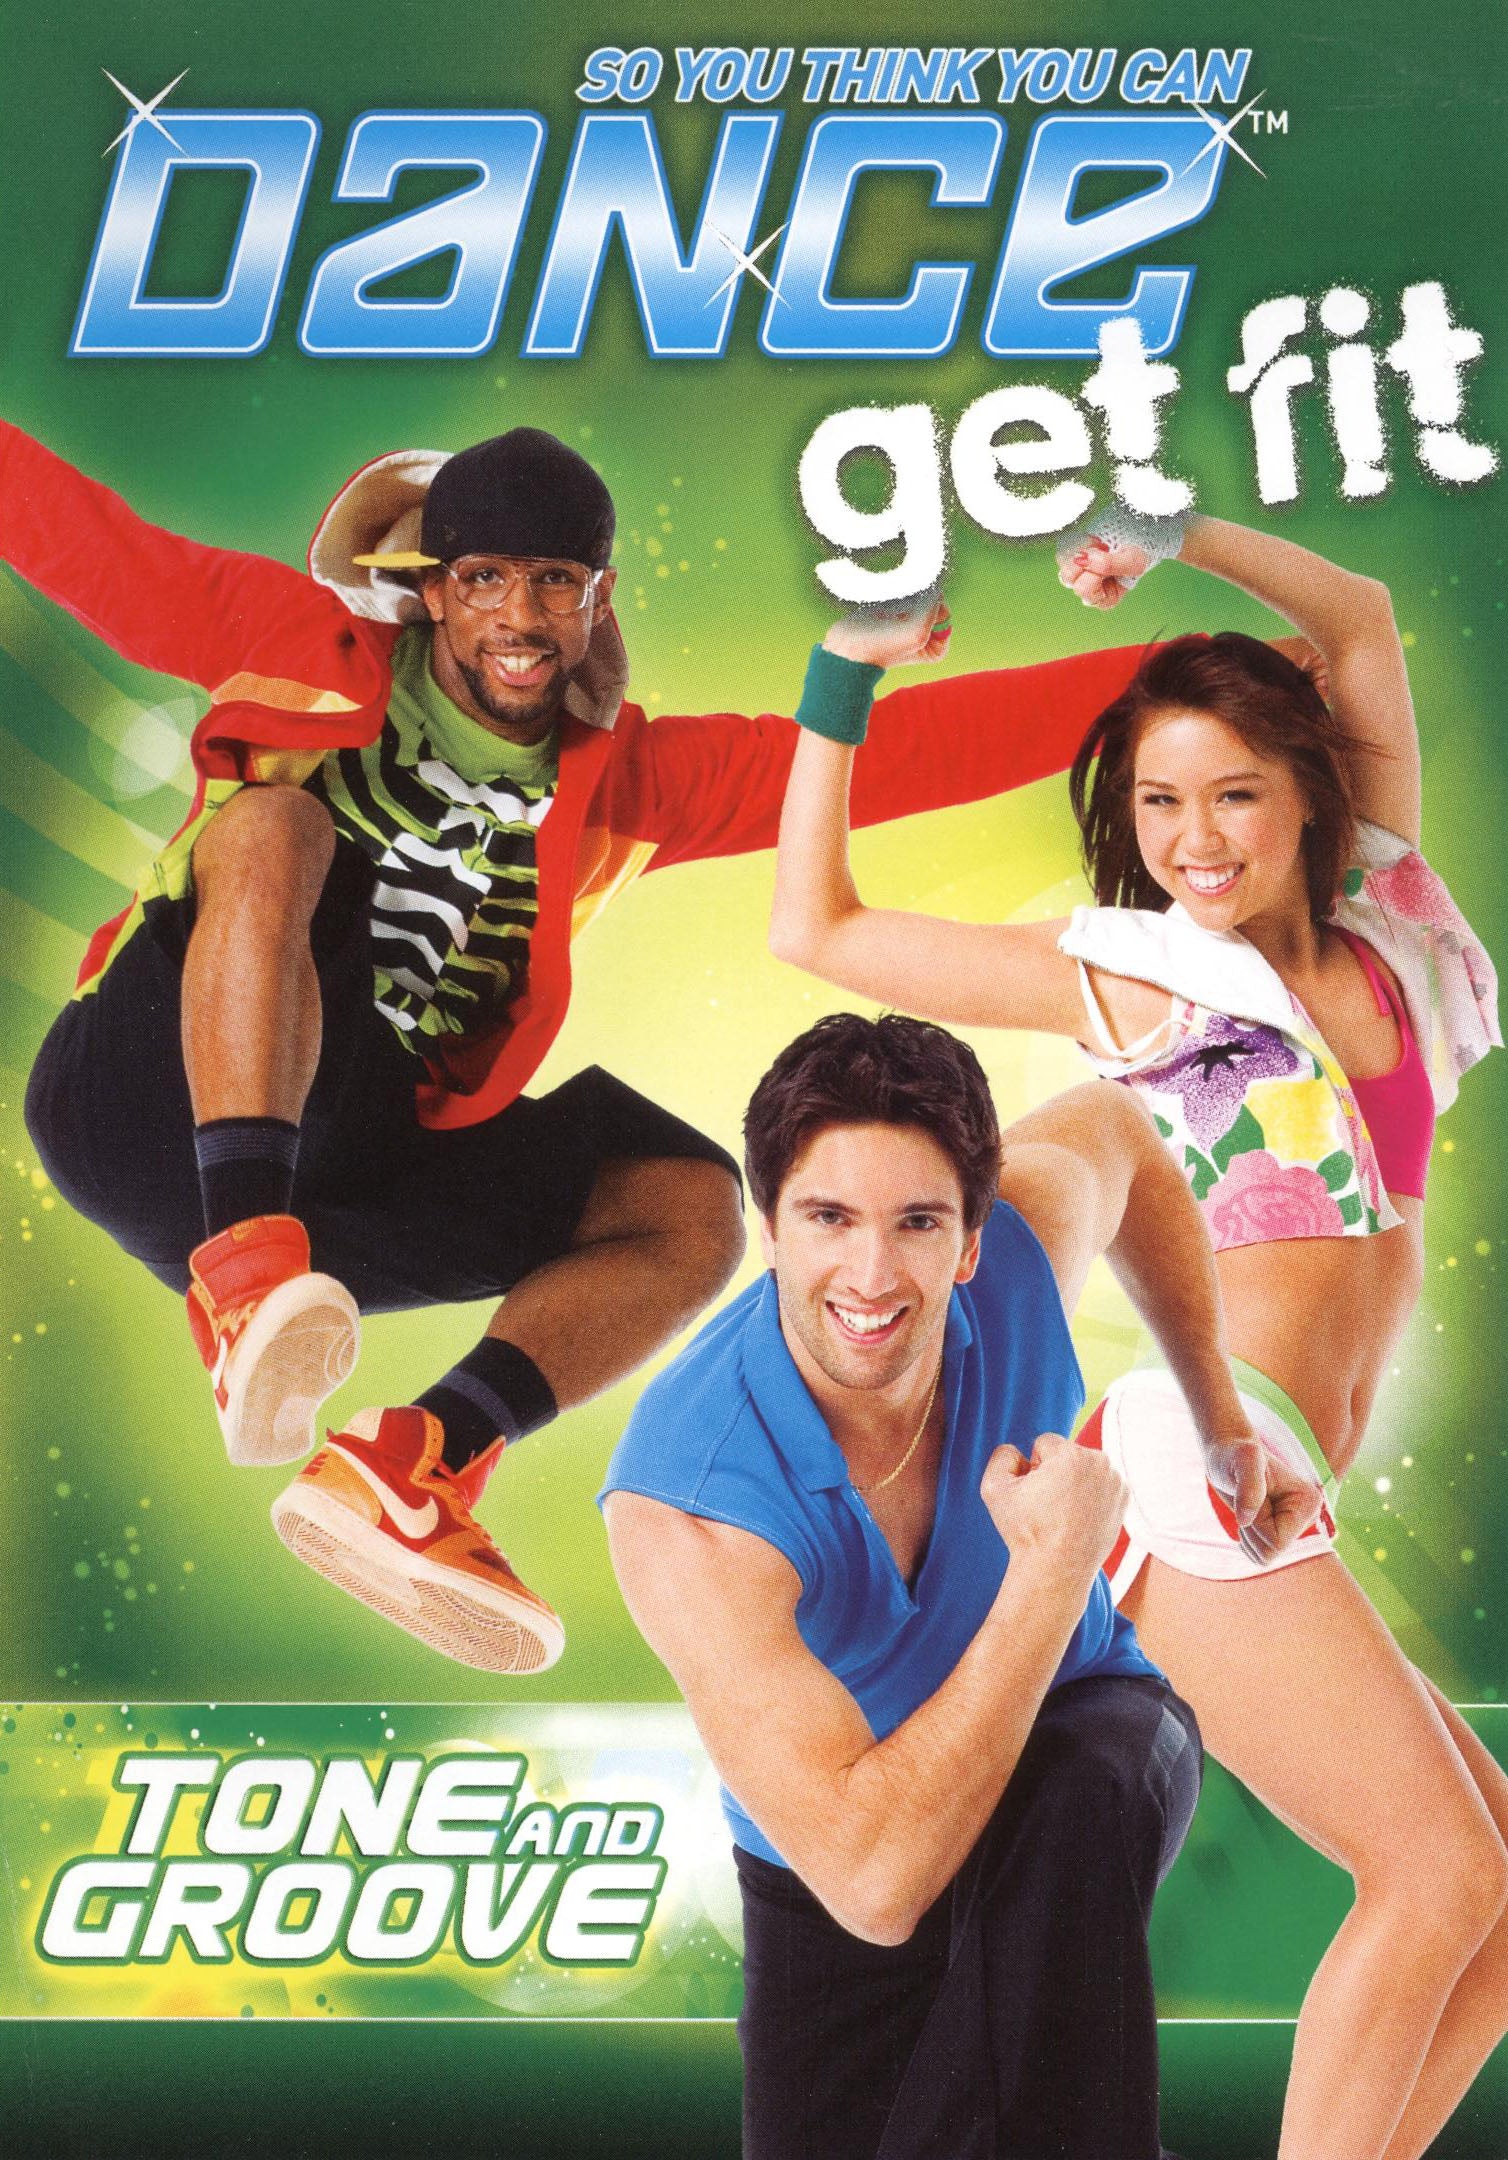 So You Think You Can Dance Get Fit: Tone And Groove cover art